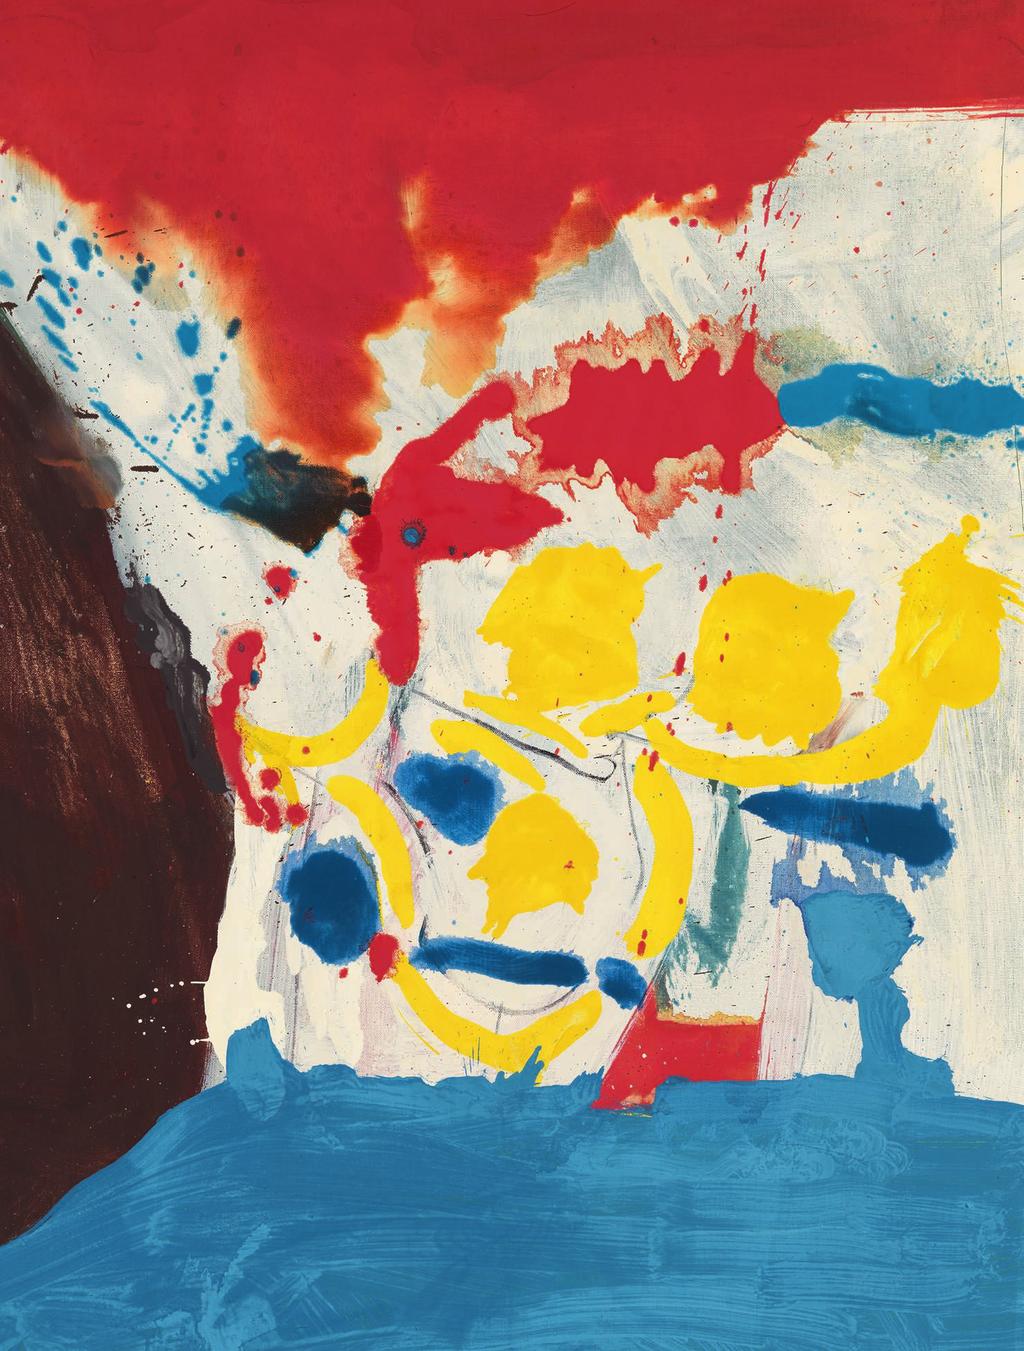 Previous spread: First Creatures, 1959, oil, enamel, charcoal, and pencil on sized, primed linen, 64 3 4 111 inches (164.5 281.